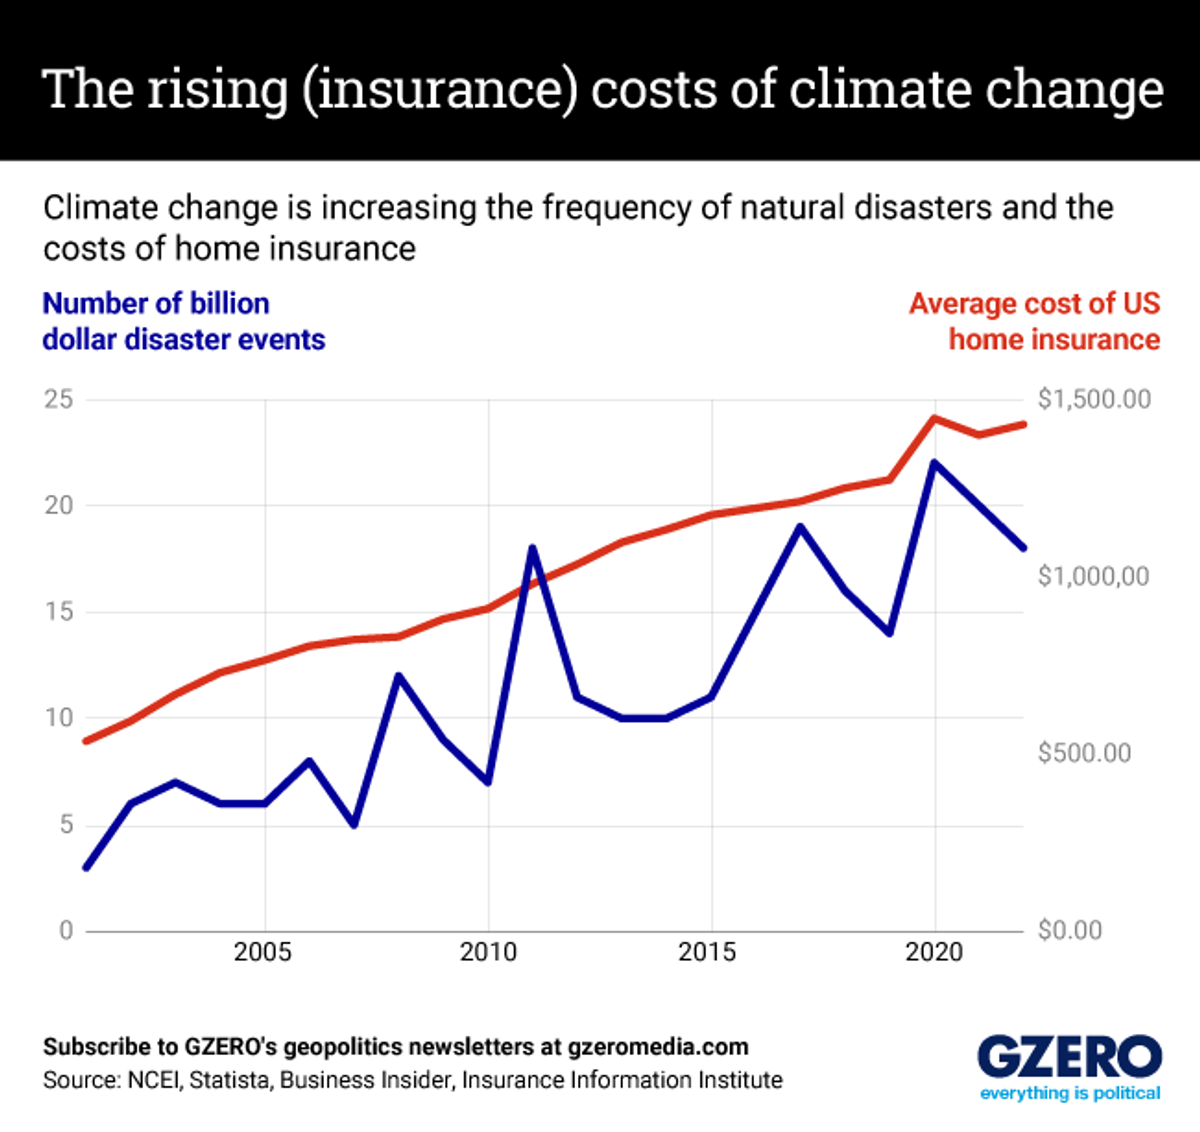 Line chart comparing average cost of US home insurance to billion-dollar natural disasters since 2000